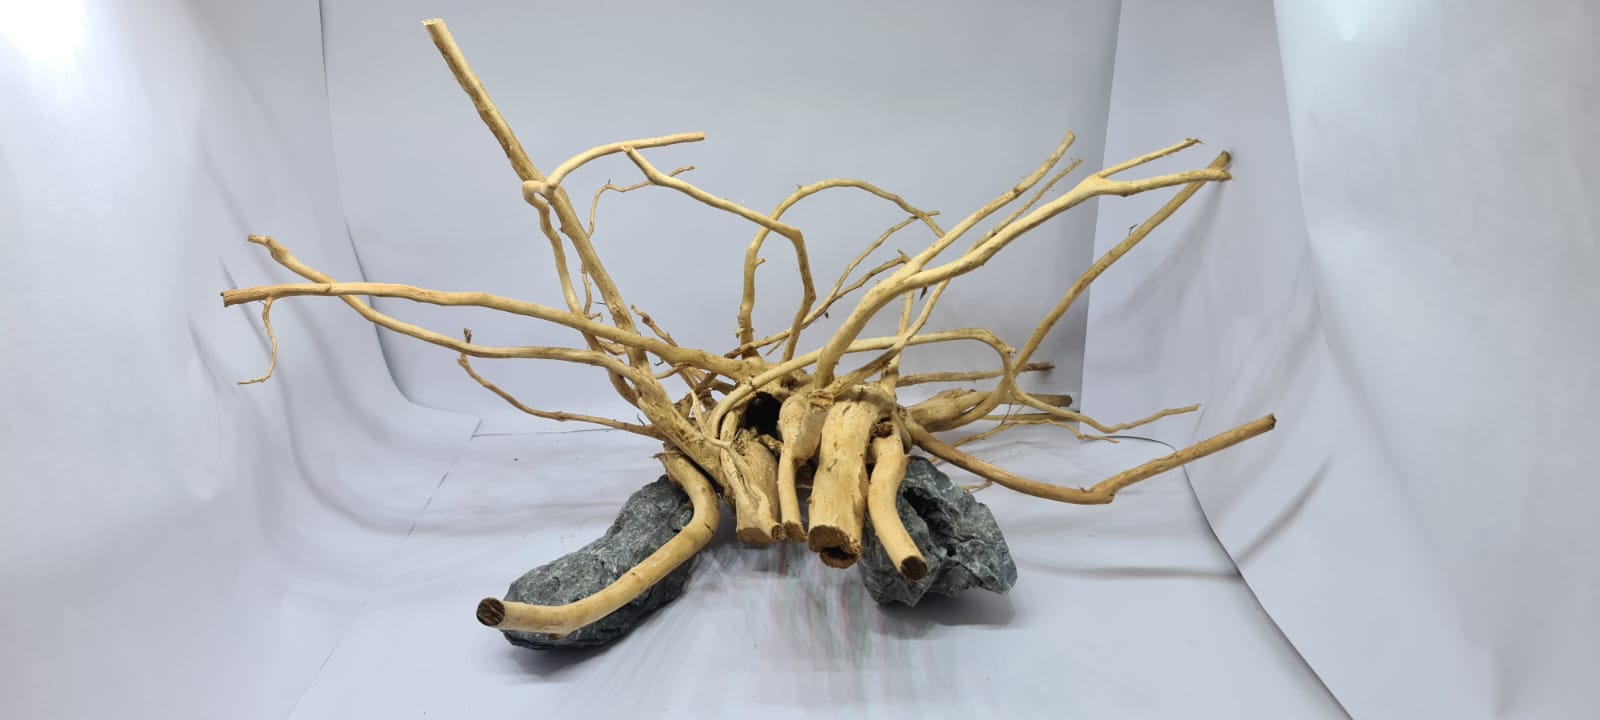 Golden Knotted Driftwood